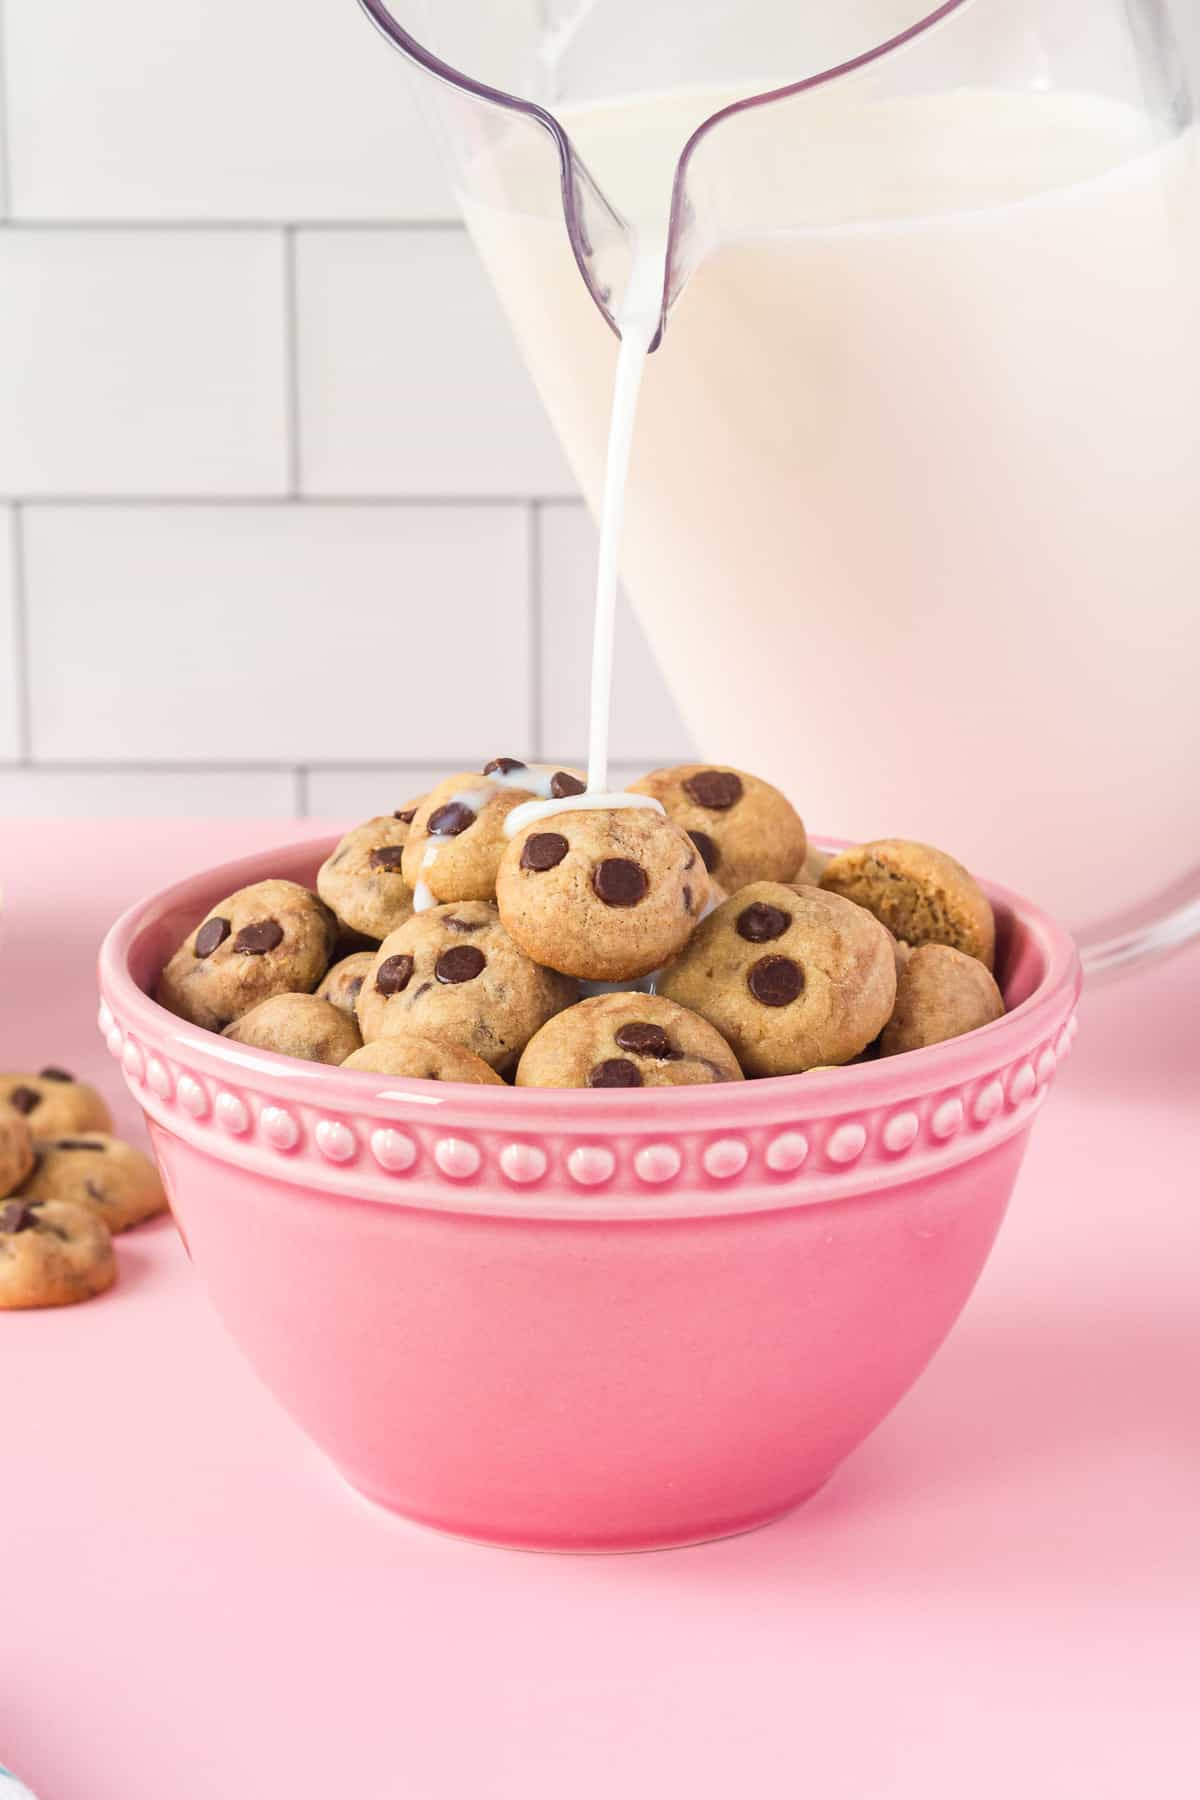 Milk being poured on chocolate chip cookie cereal.